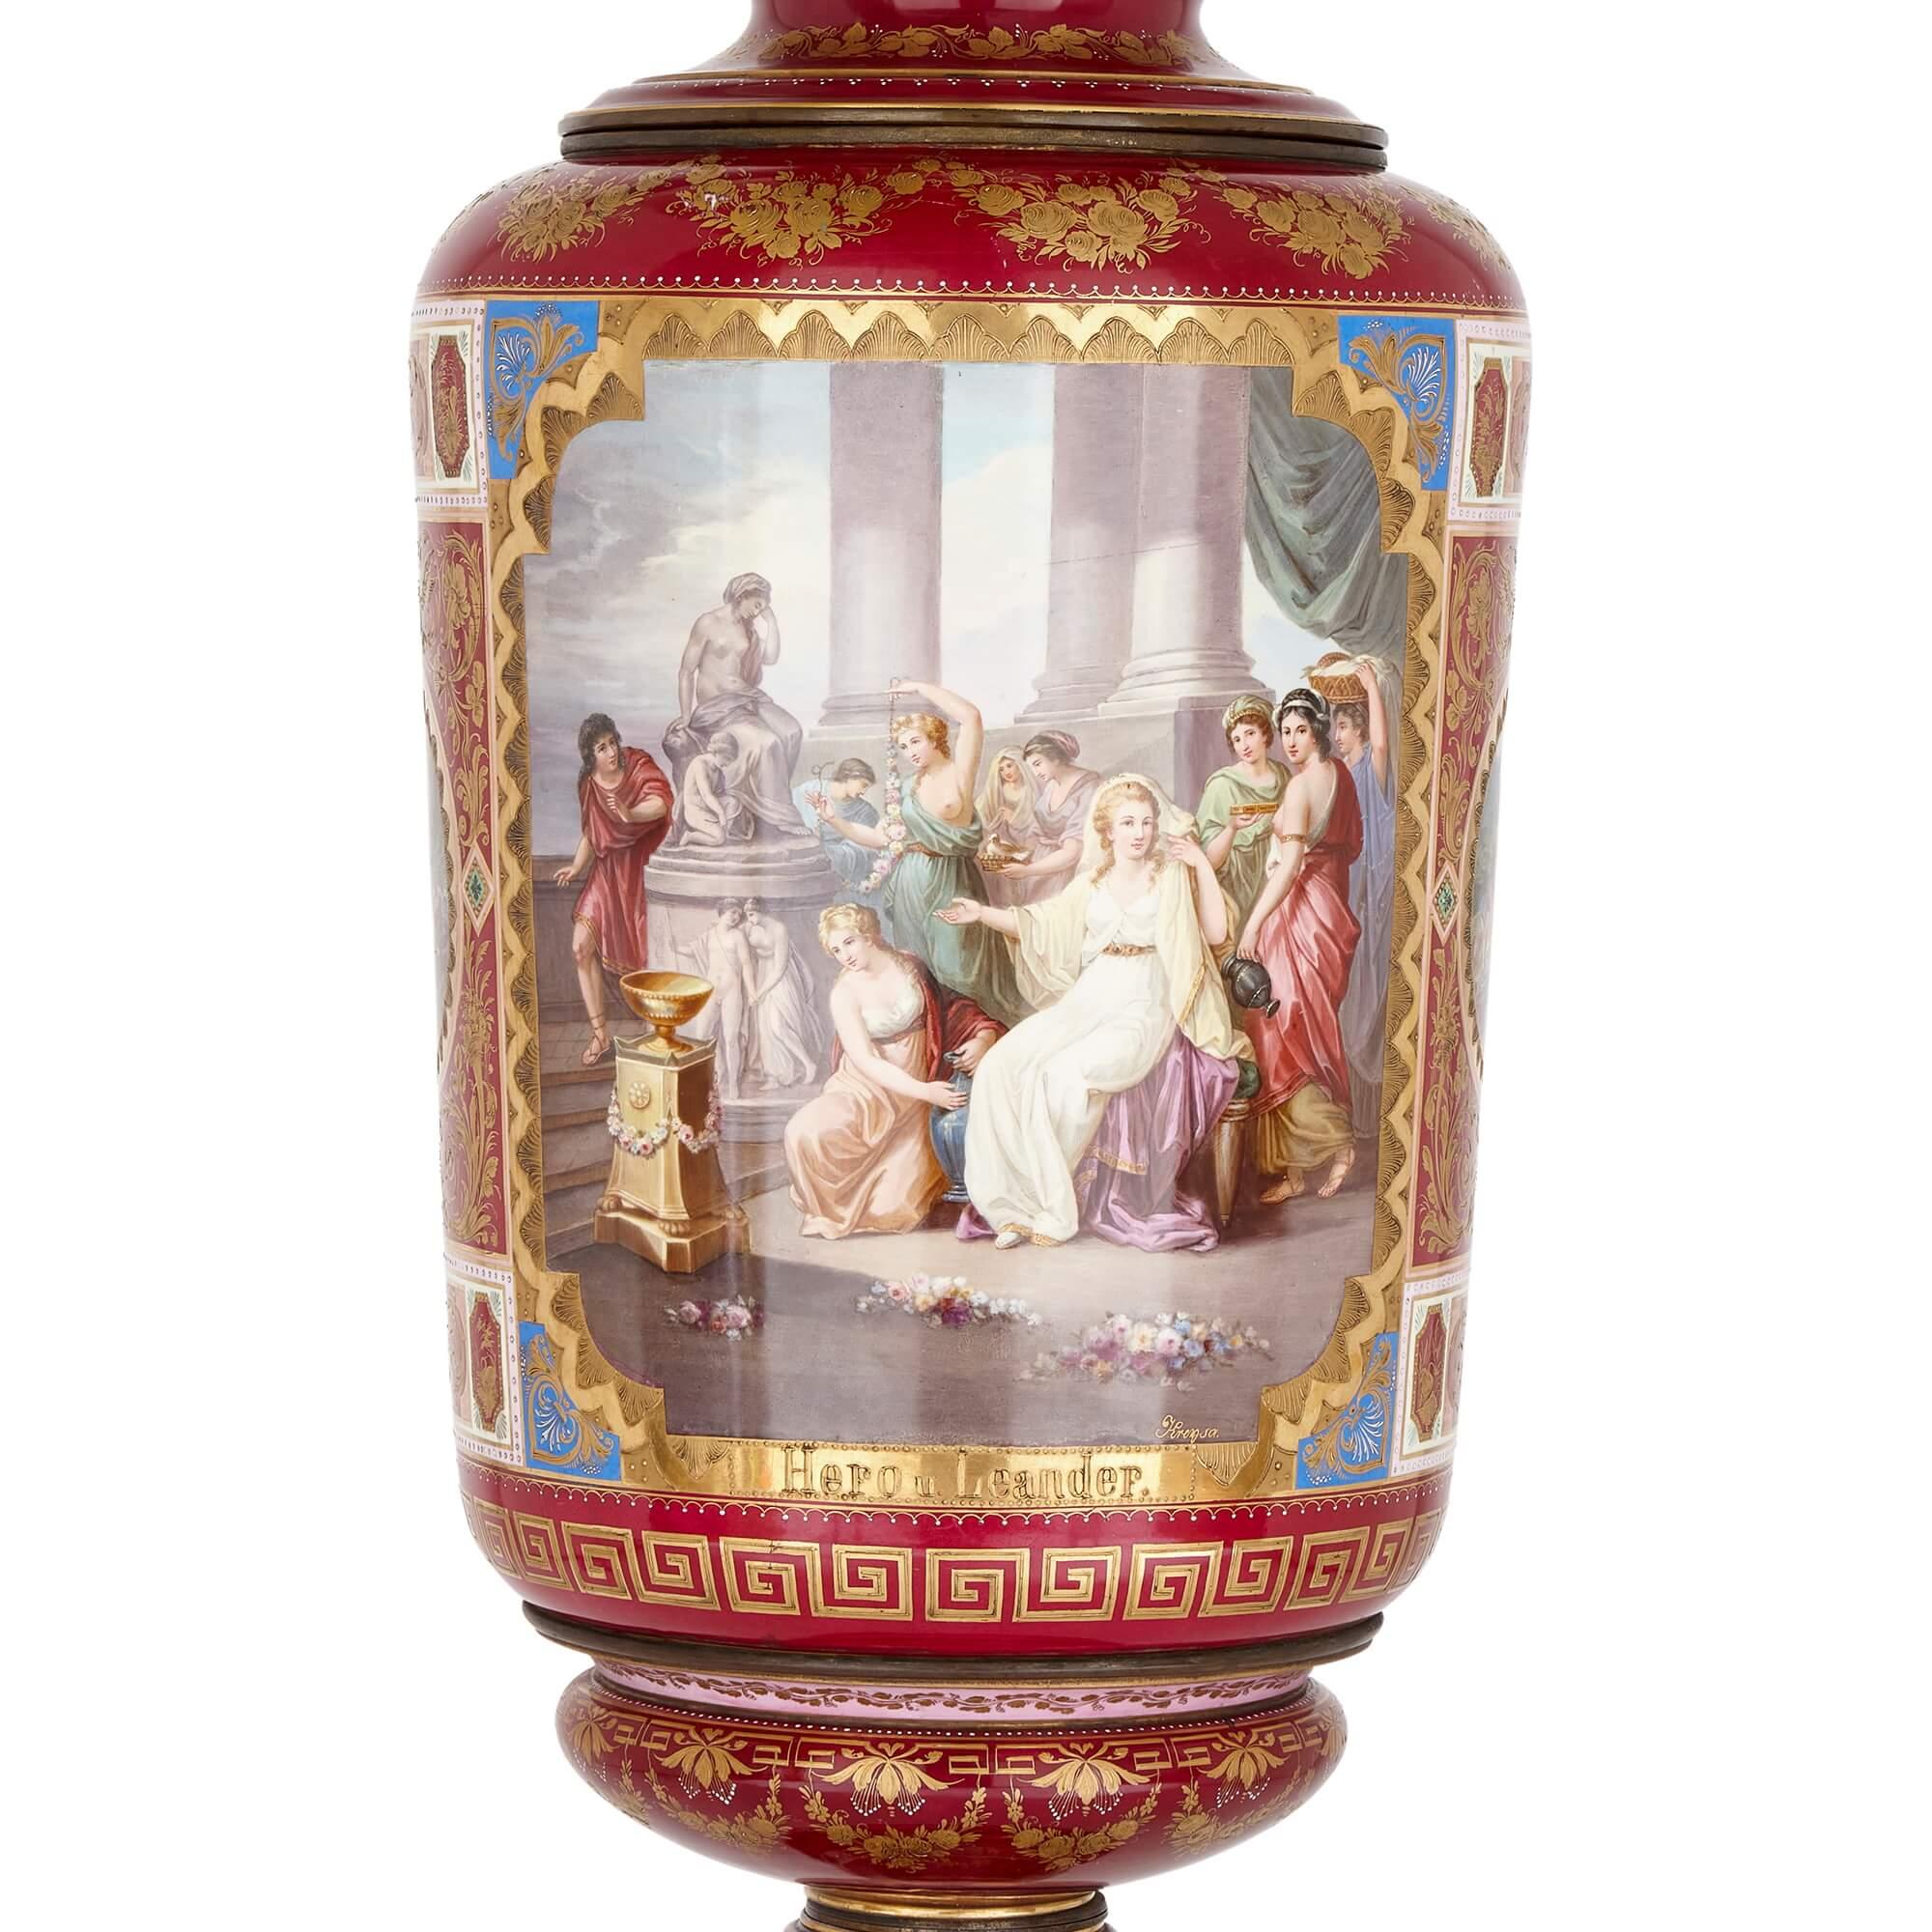 Monumental Royal Vienna classical porcelain vase
Austria, 19th Century
Height 152cm, diameter 41cm

This magnificent vase was made by the renowned Royal Vienna Porcelain Manufactory in the 19th century. Loosely of baluster form and surmounted by a